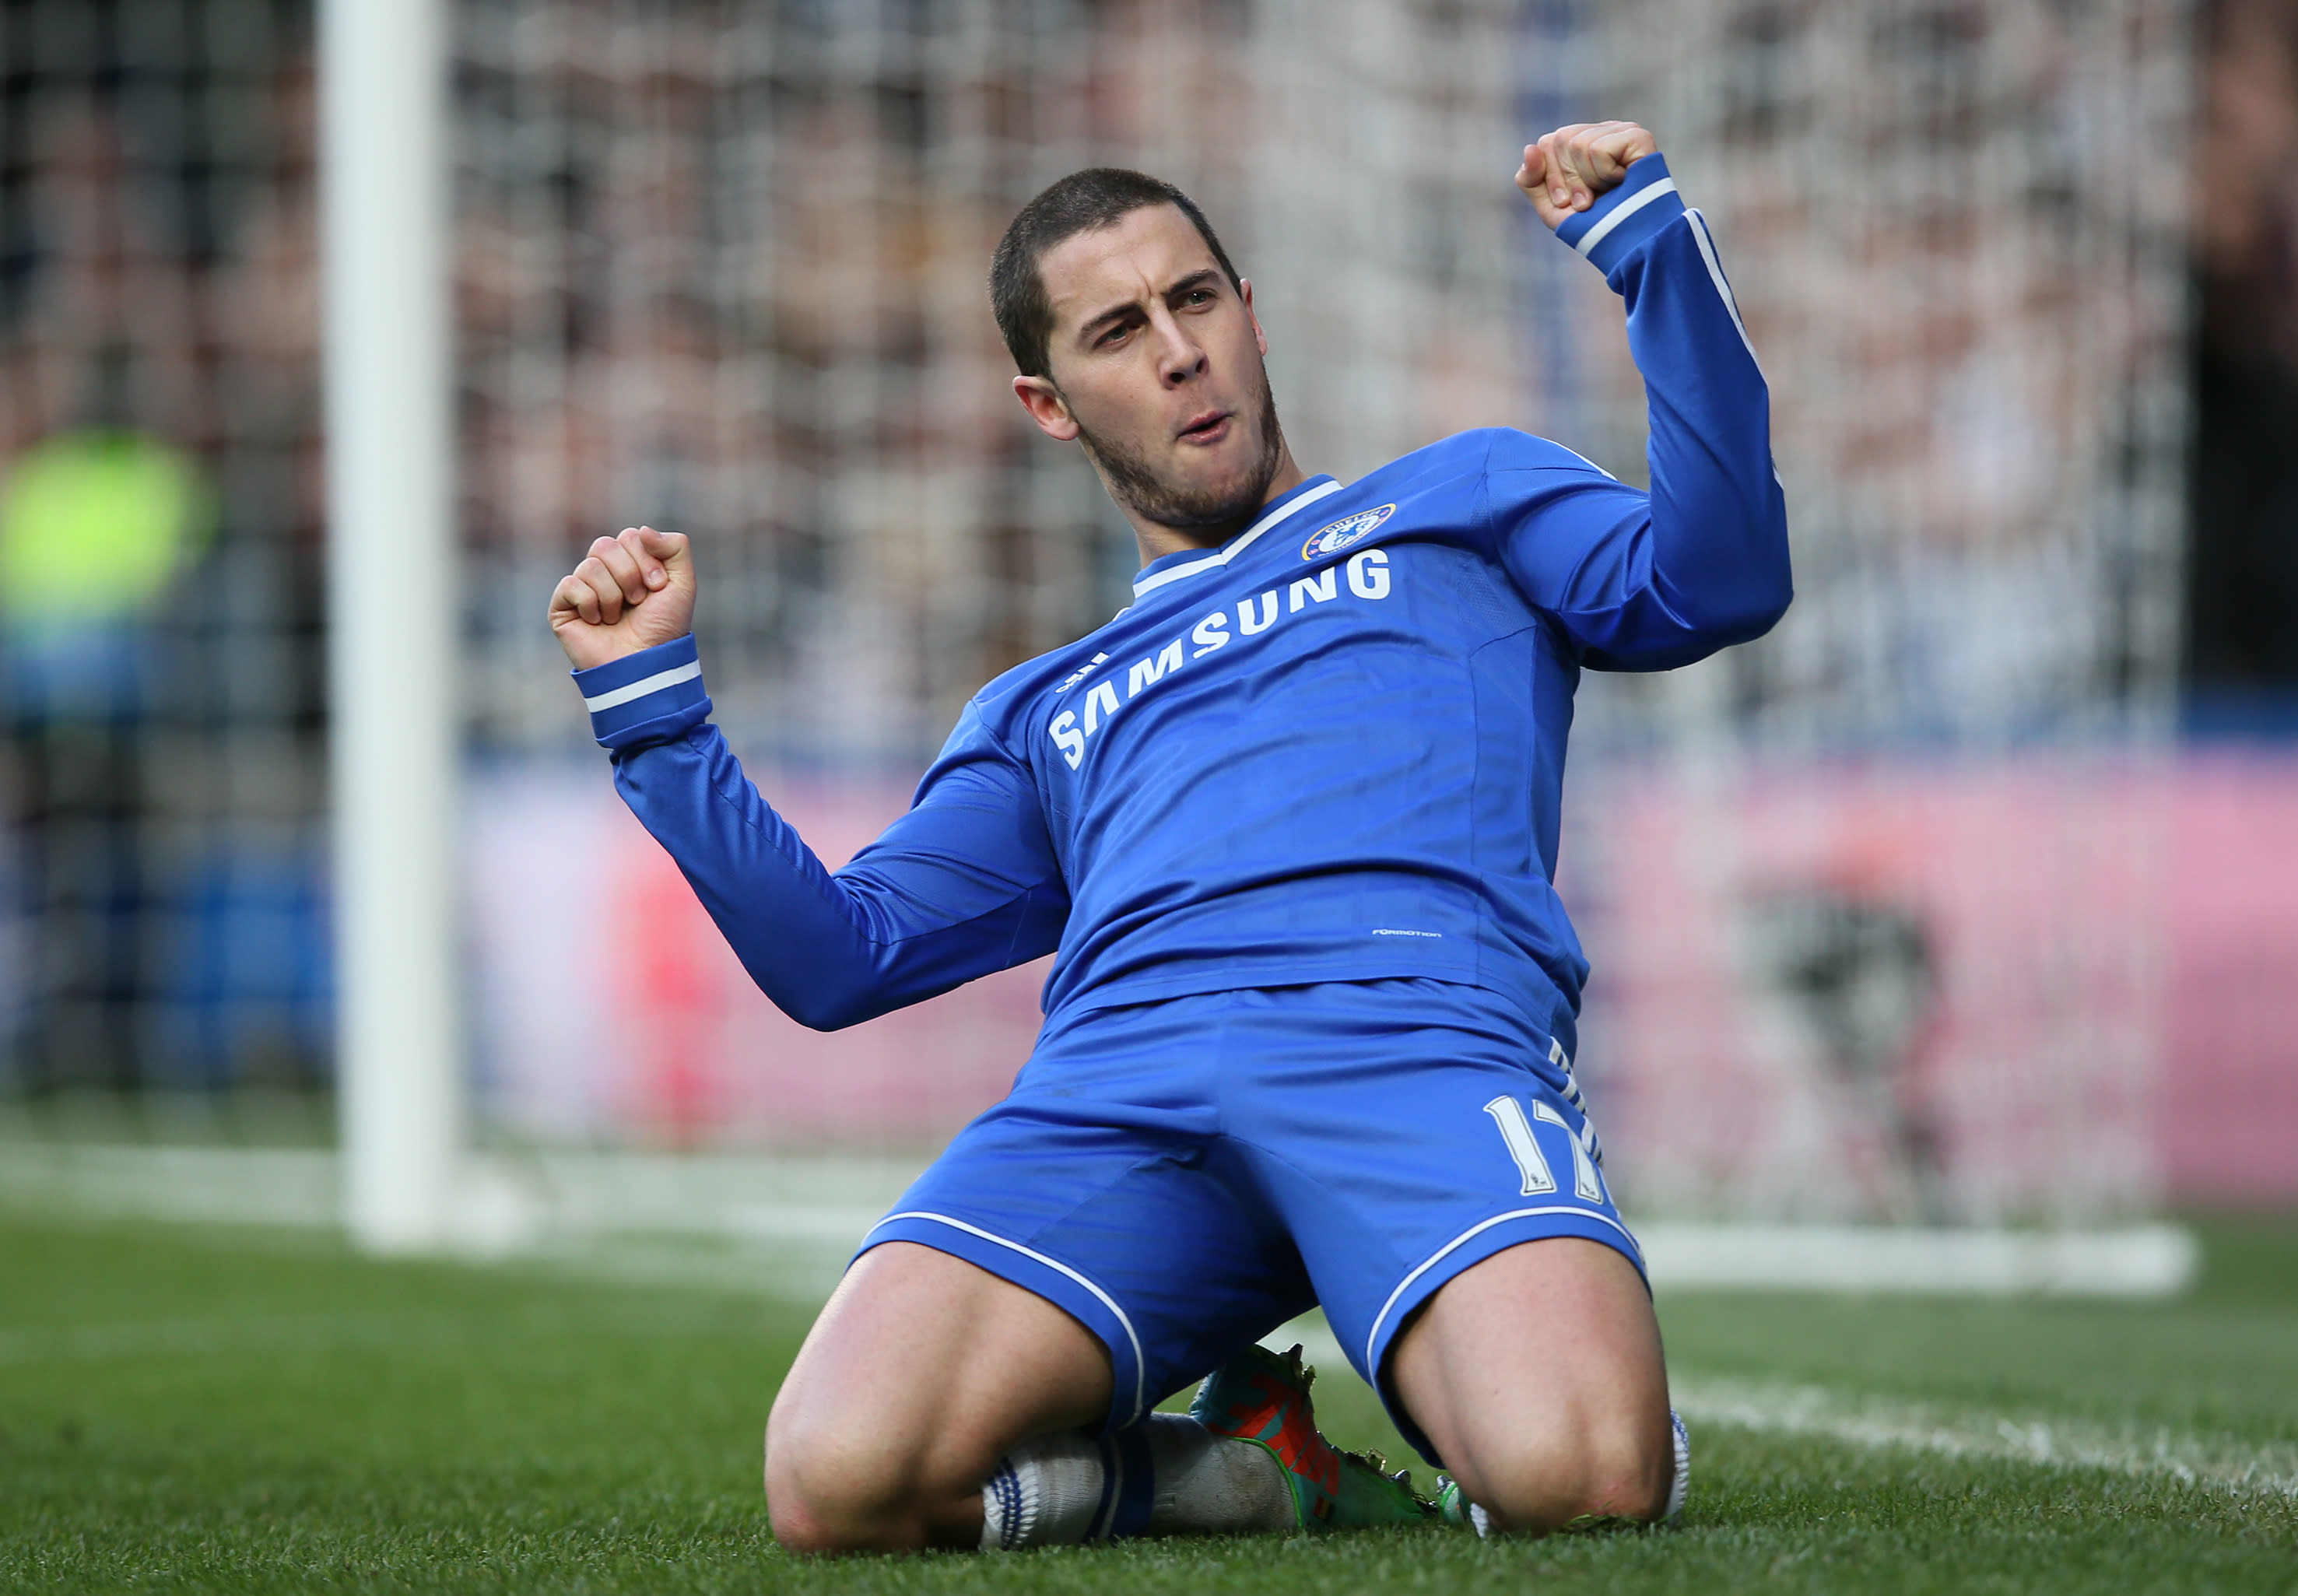  Eden Hazard celebrates scoring his first goal for Chelsea during his debut against Wigan Athletic on 18 August 2012.